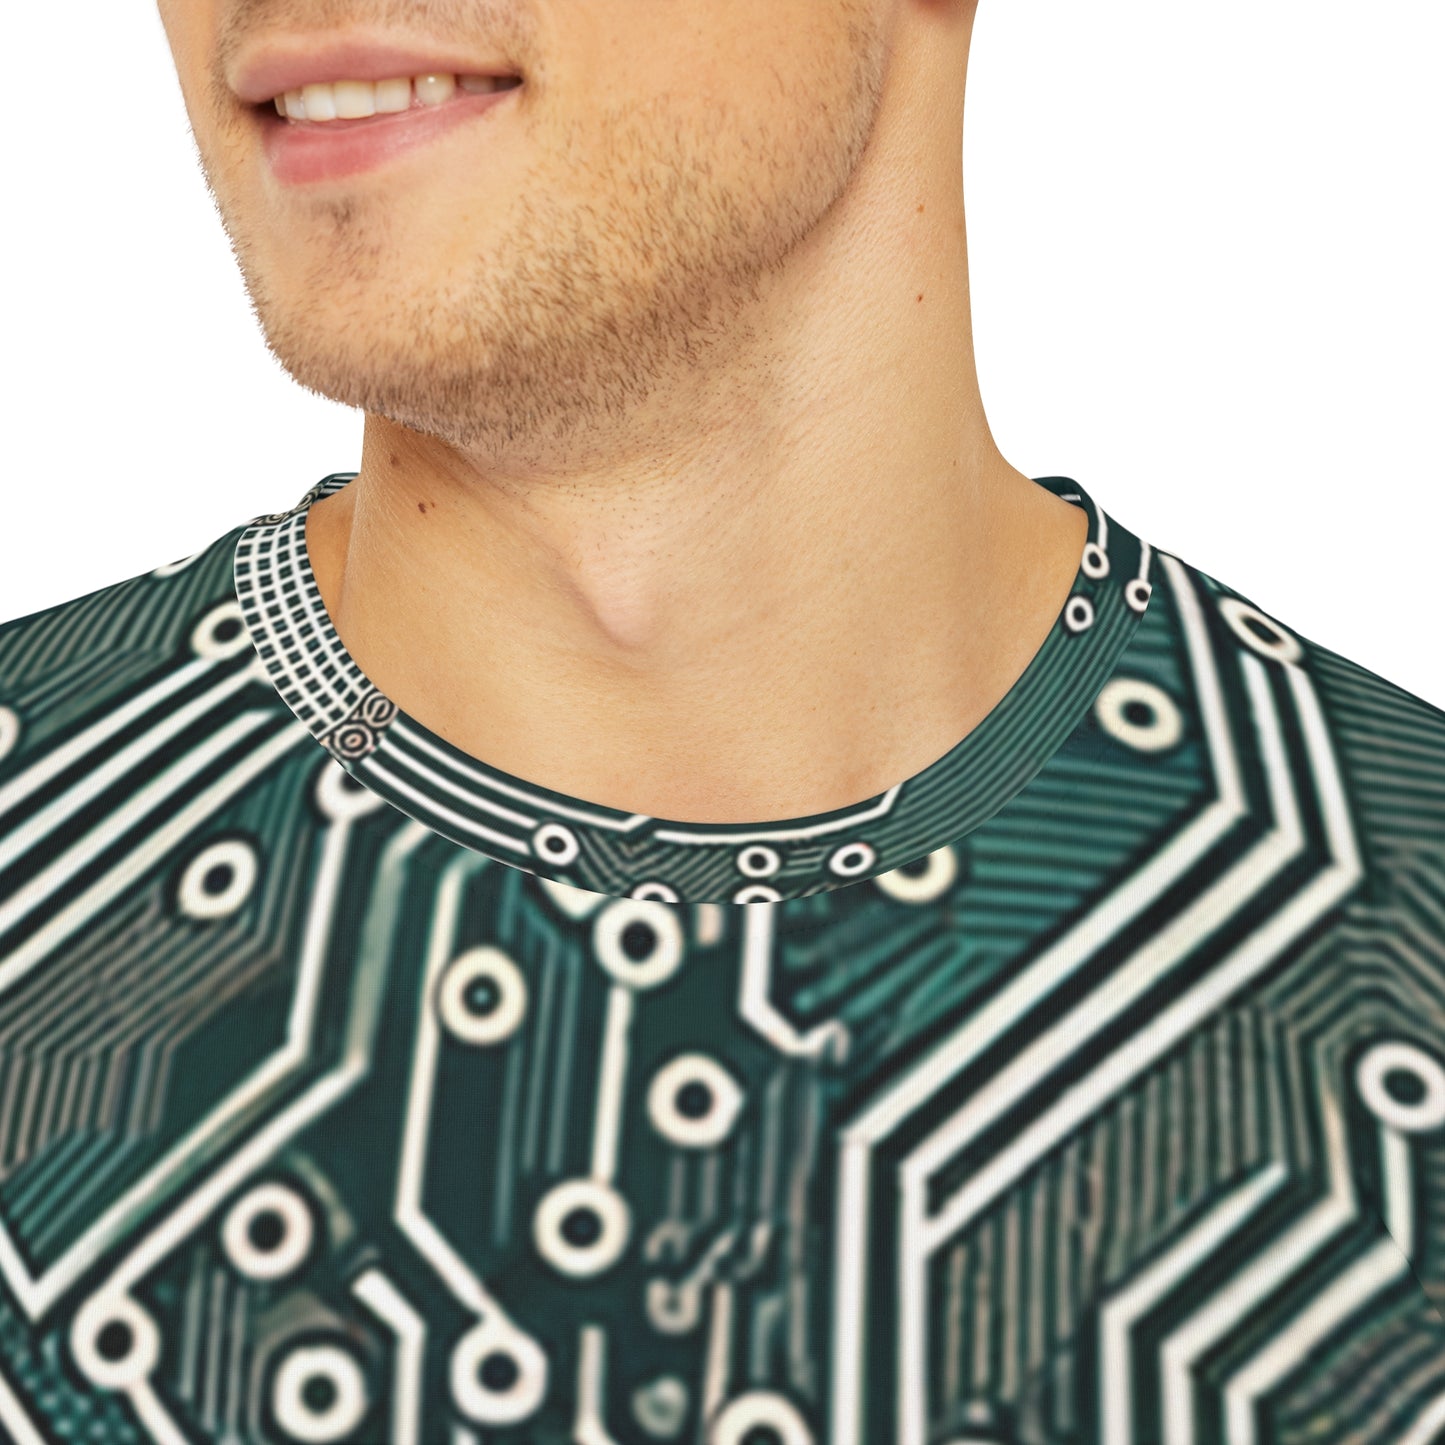 Close-up shot of the Circuit Symmetry Matrix Crewneck Pullover All-Over Print Short-Sleeved Shirt green gray black beige circuit pattern worn by a white man sitting on a stool chair 